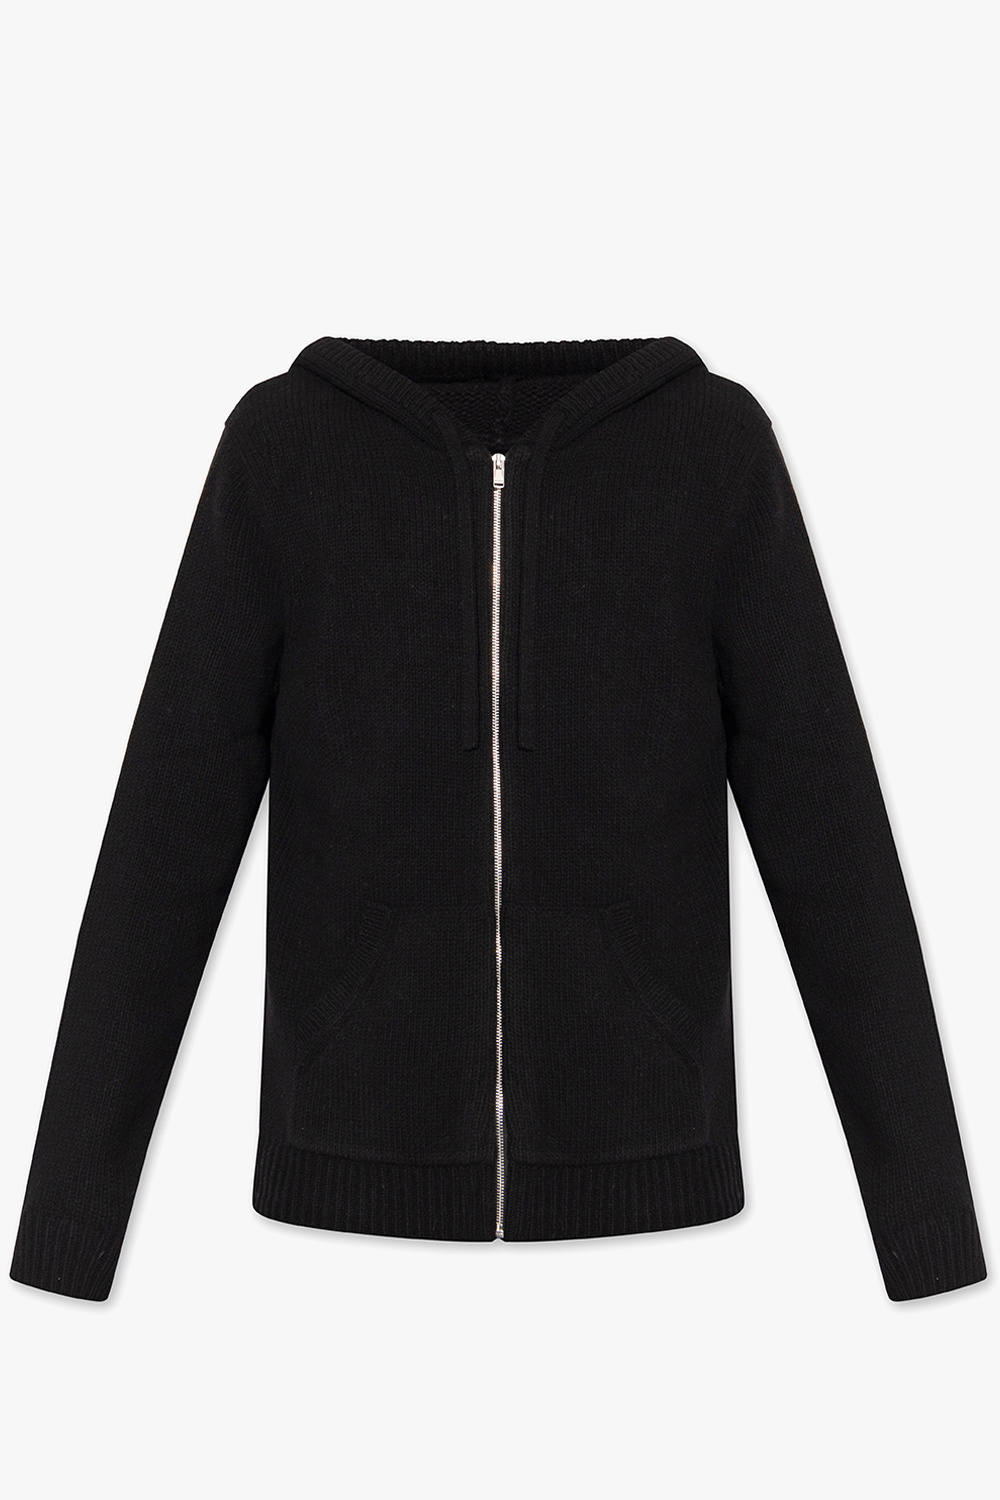 Zadig & Voltaire Patterned Saison hoodie